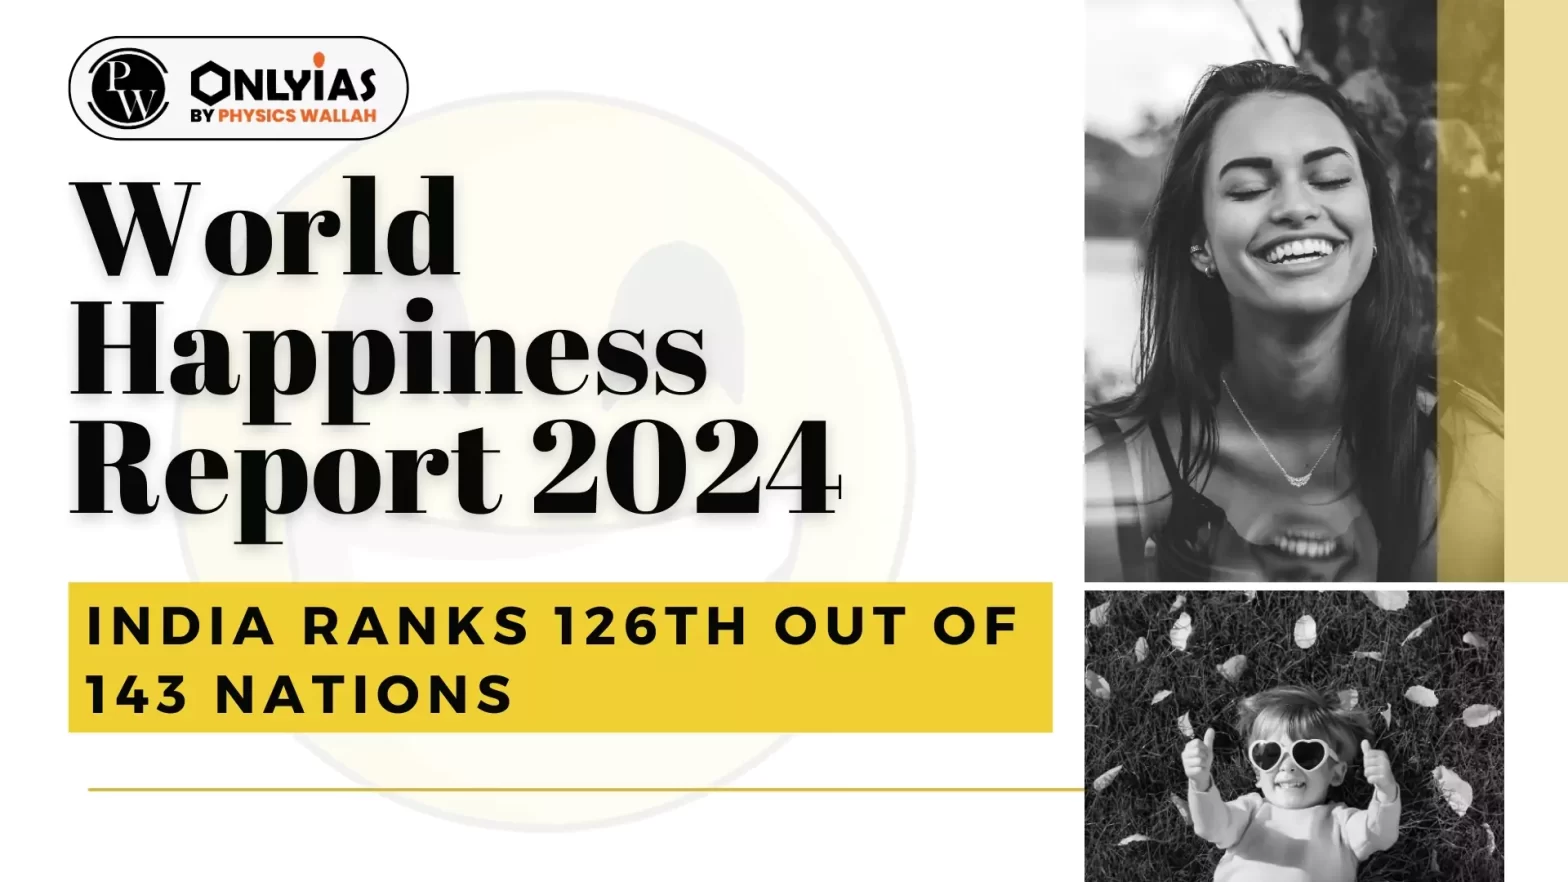 World Happiness Report 2024: India Ranks 126th Out of 143 Nations